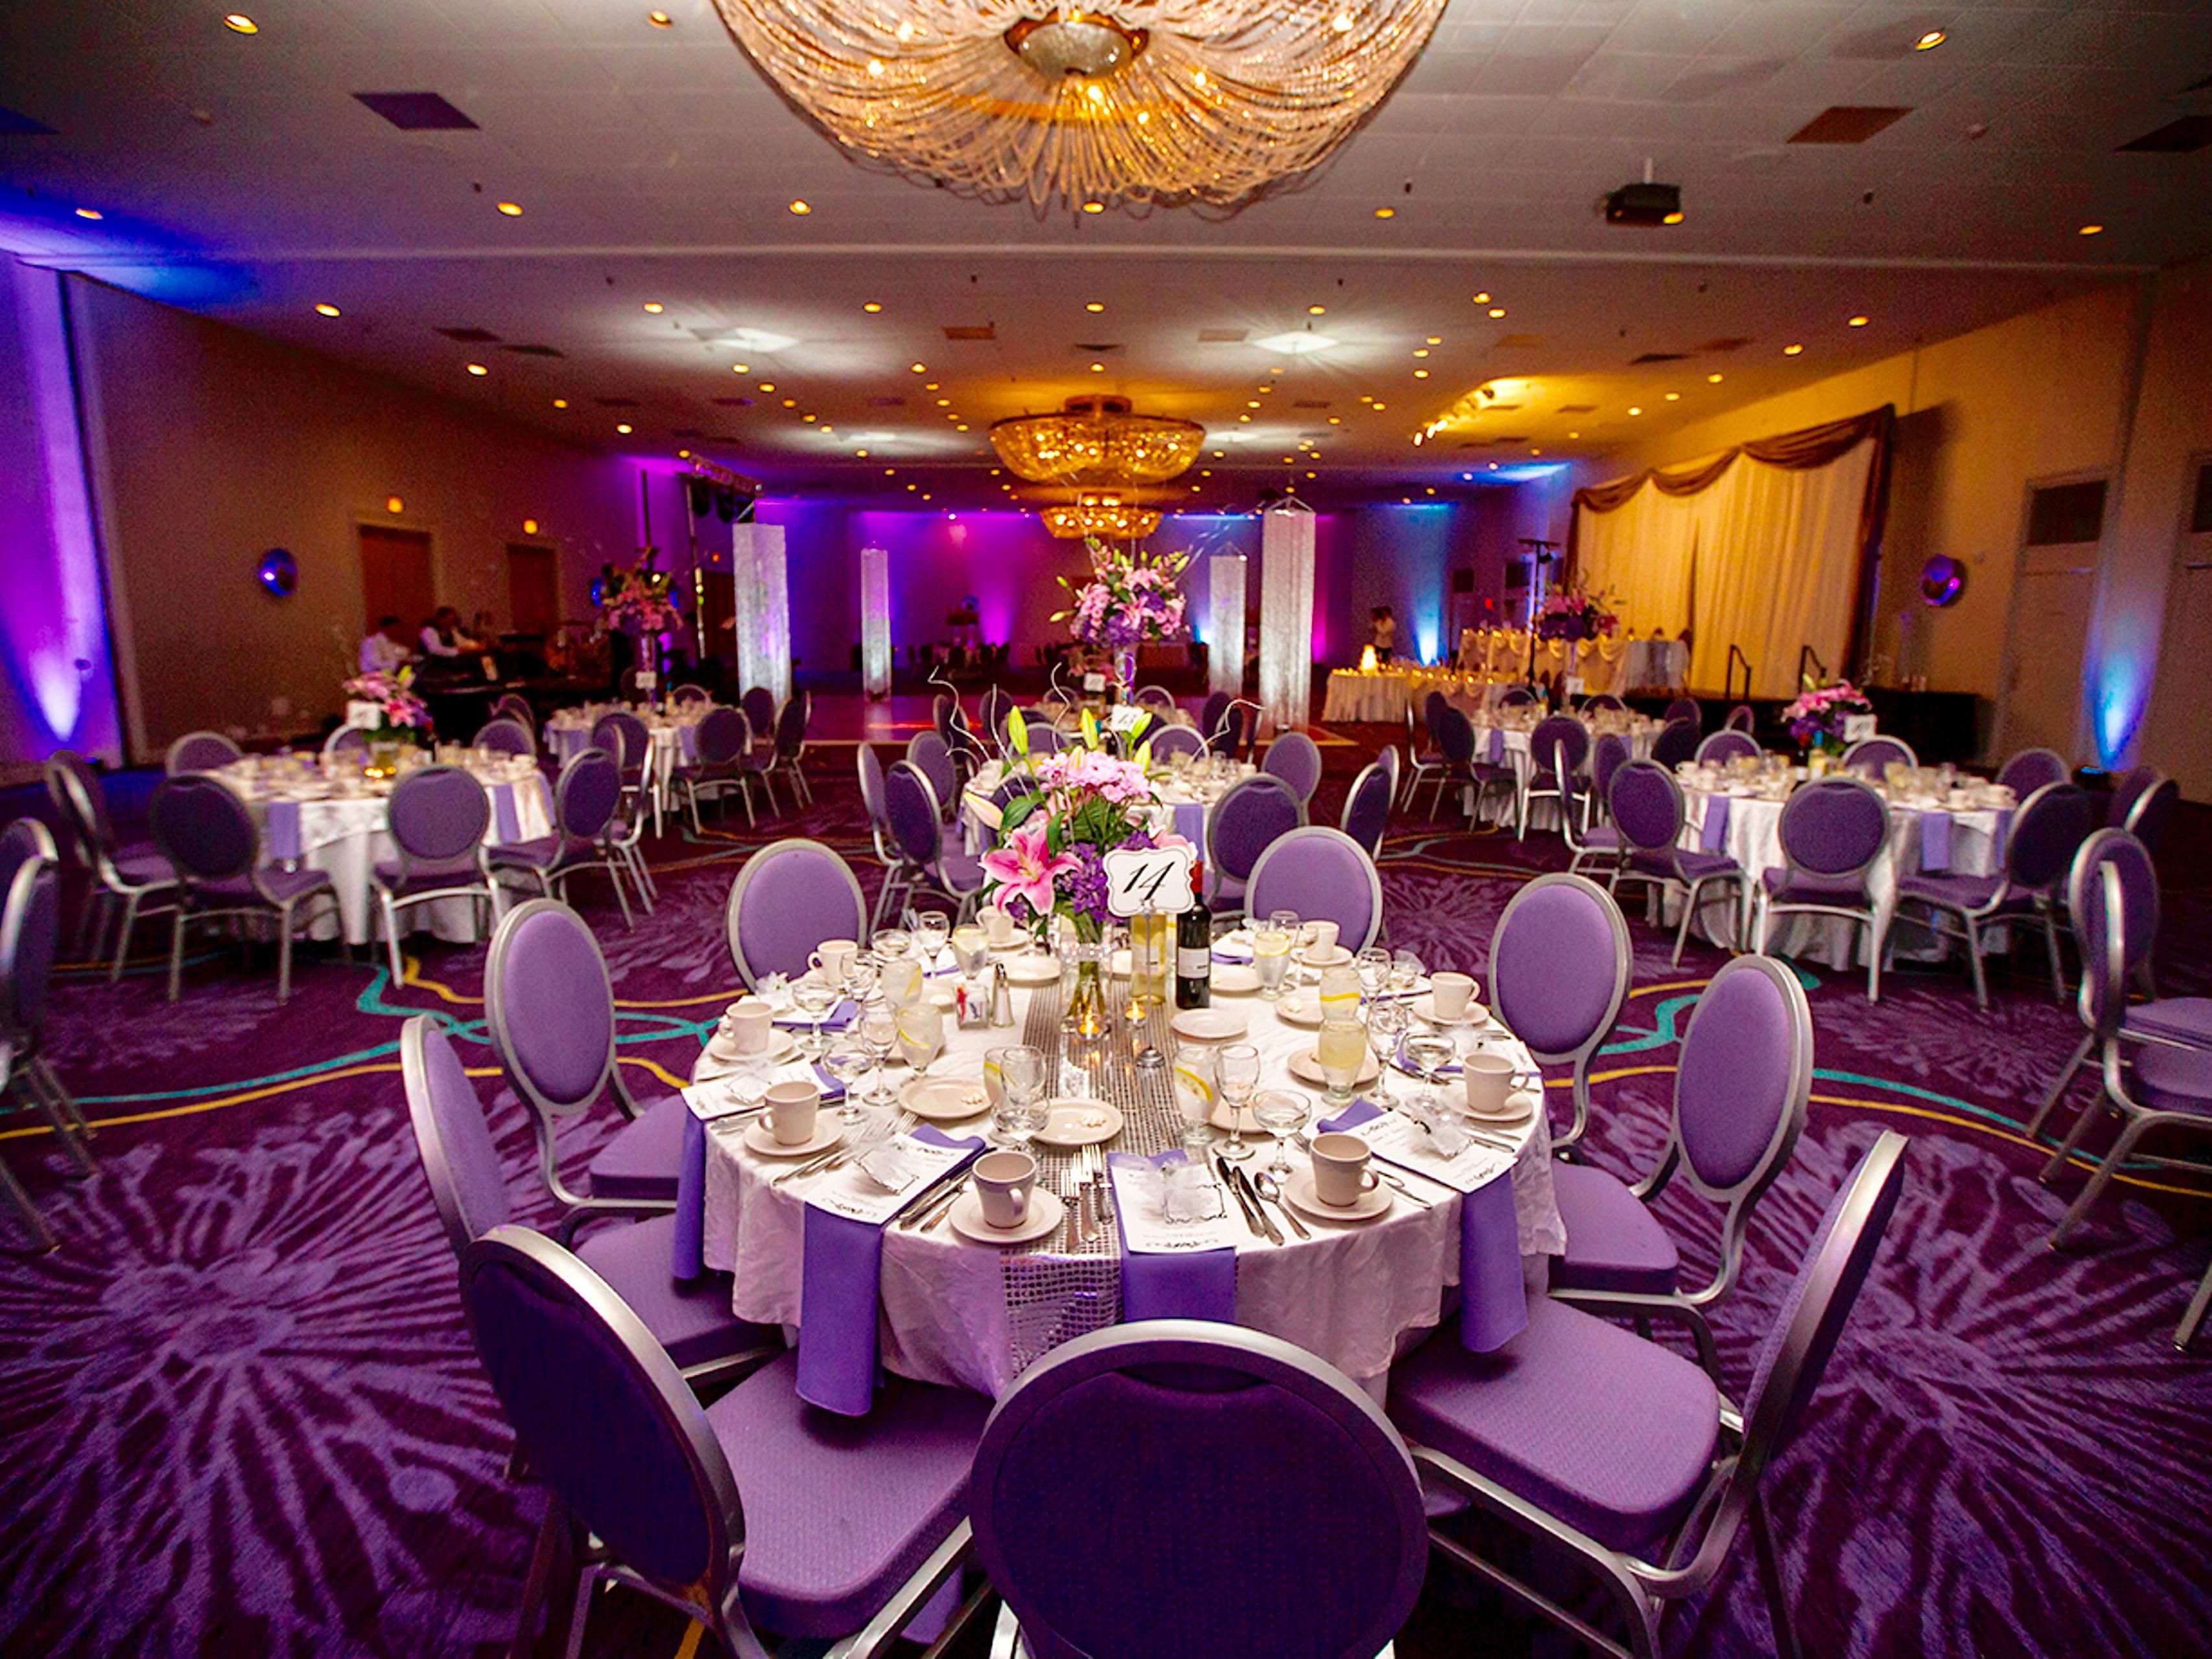 From unique floor plans to customized menus, our dedicated Wedding Sales Manager does it all to ensure a memorable event. The Hotel features our Grand Ballroom hosting up to 500 guests with three custom chandeliers down the center of the room. For a more intimate affair, consider utilizing one of our smaller event spaces. 